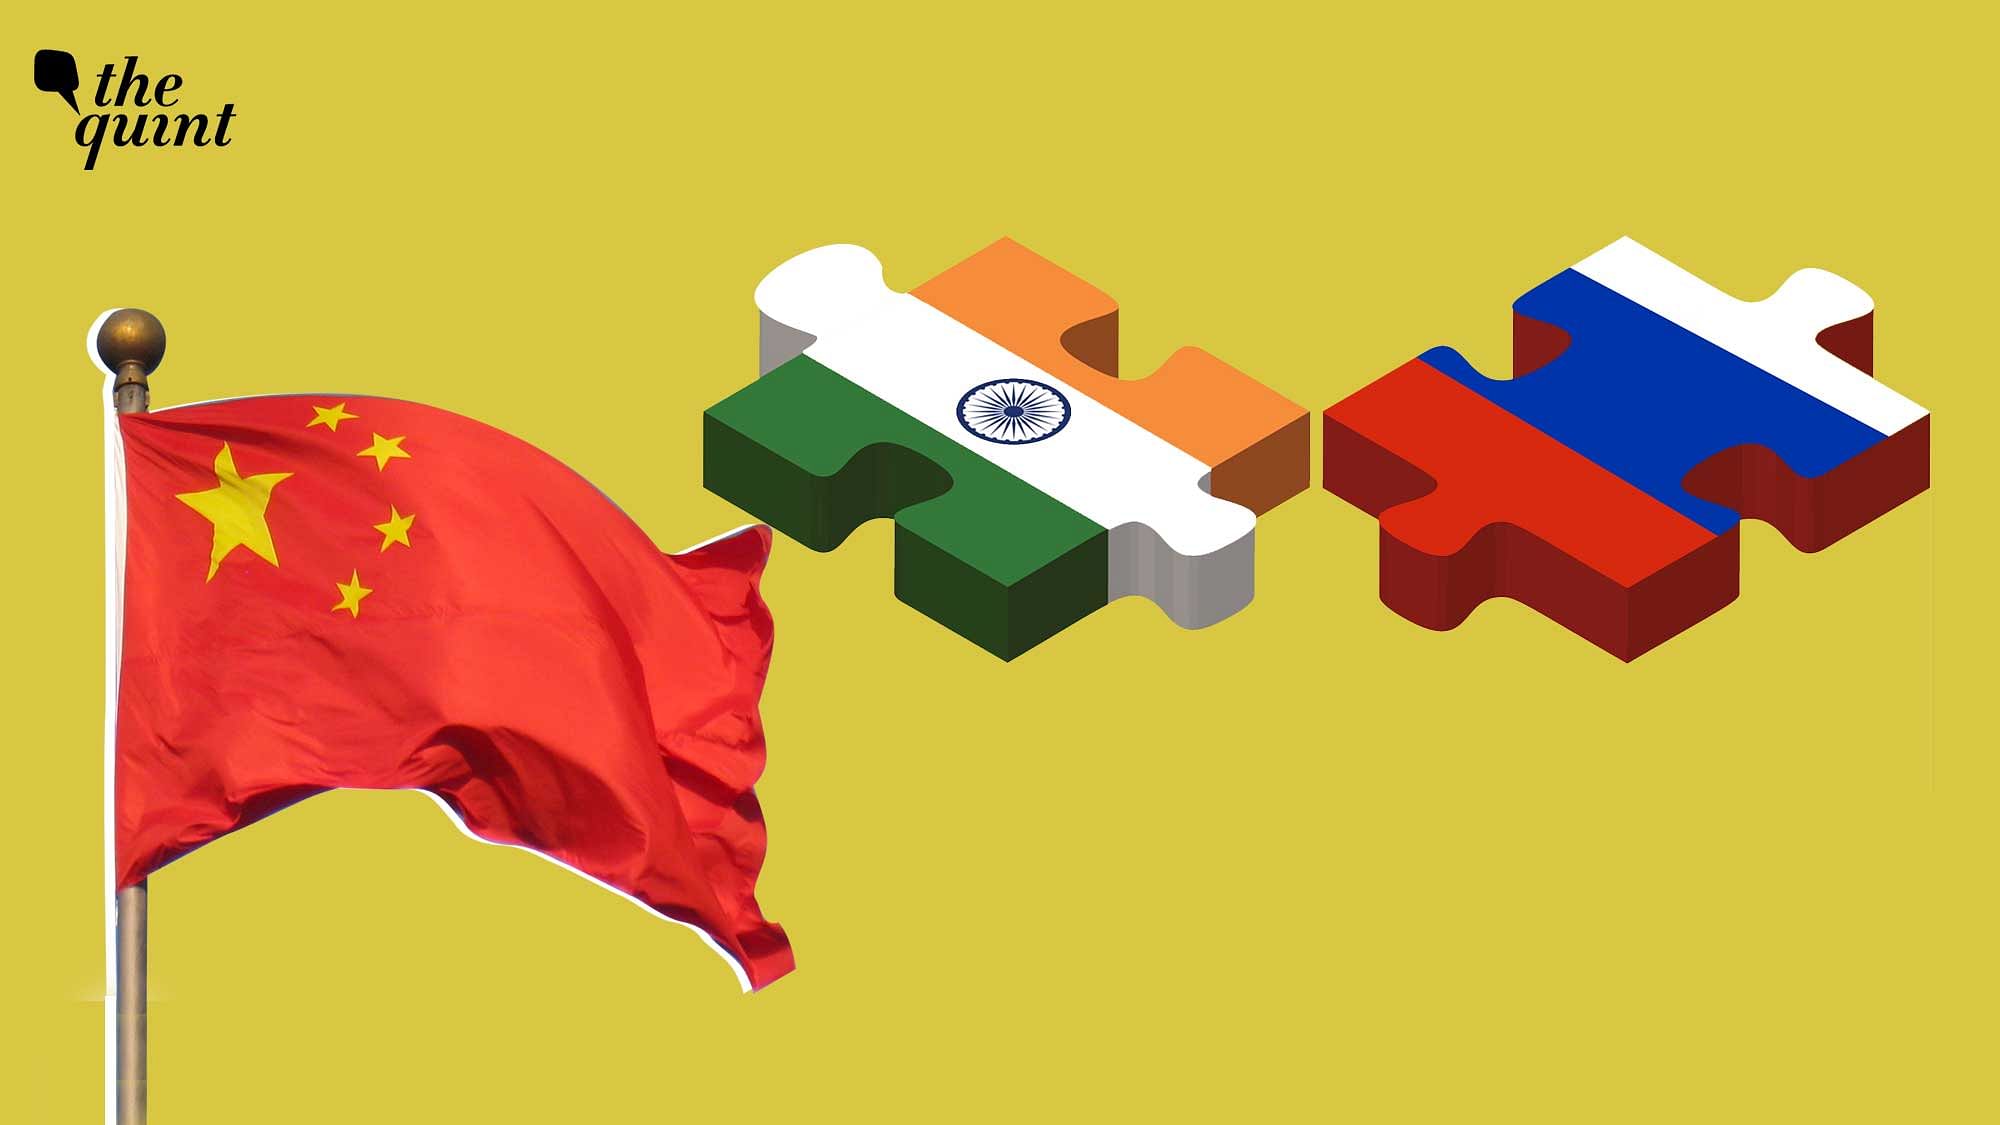 Images of China’s flag, Indian flag, Russian flag used for representation.